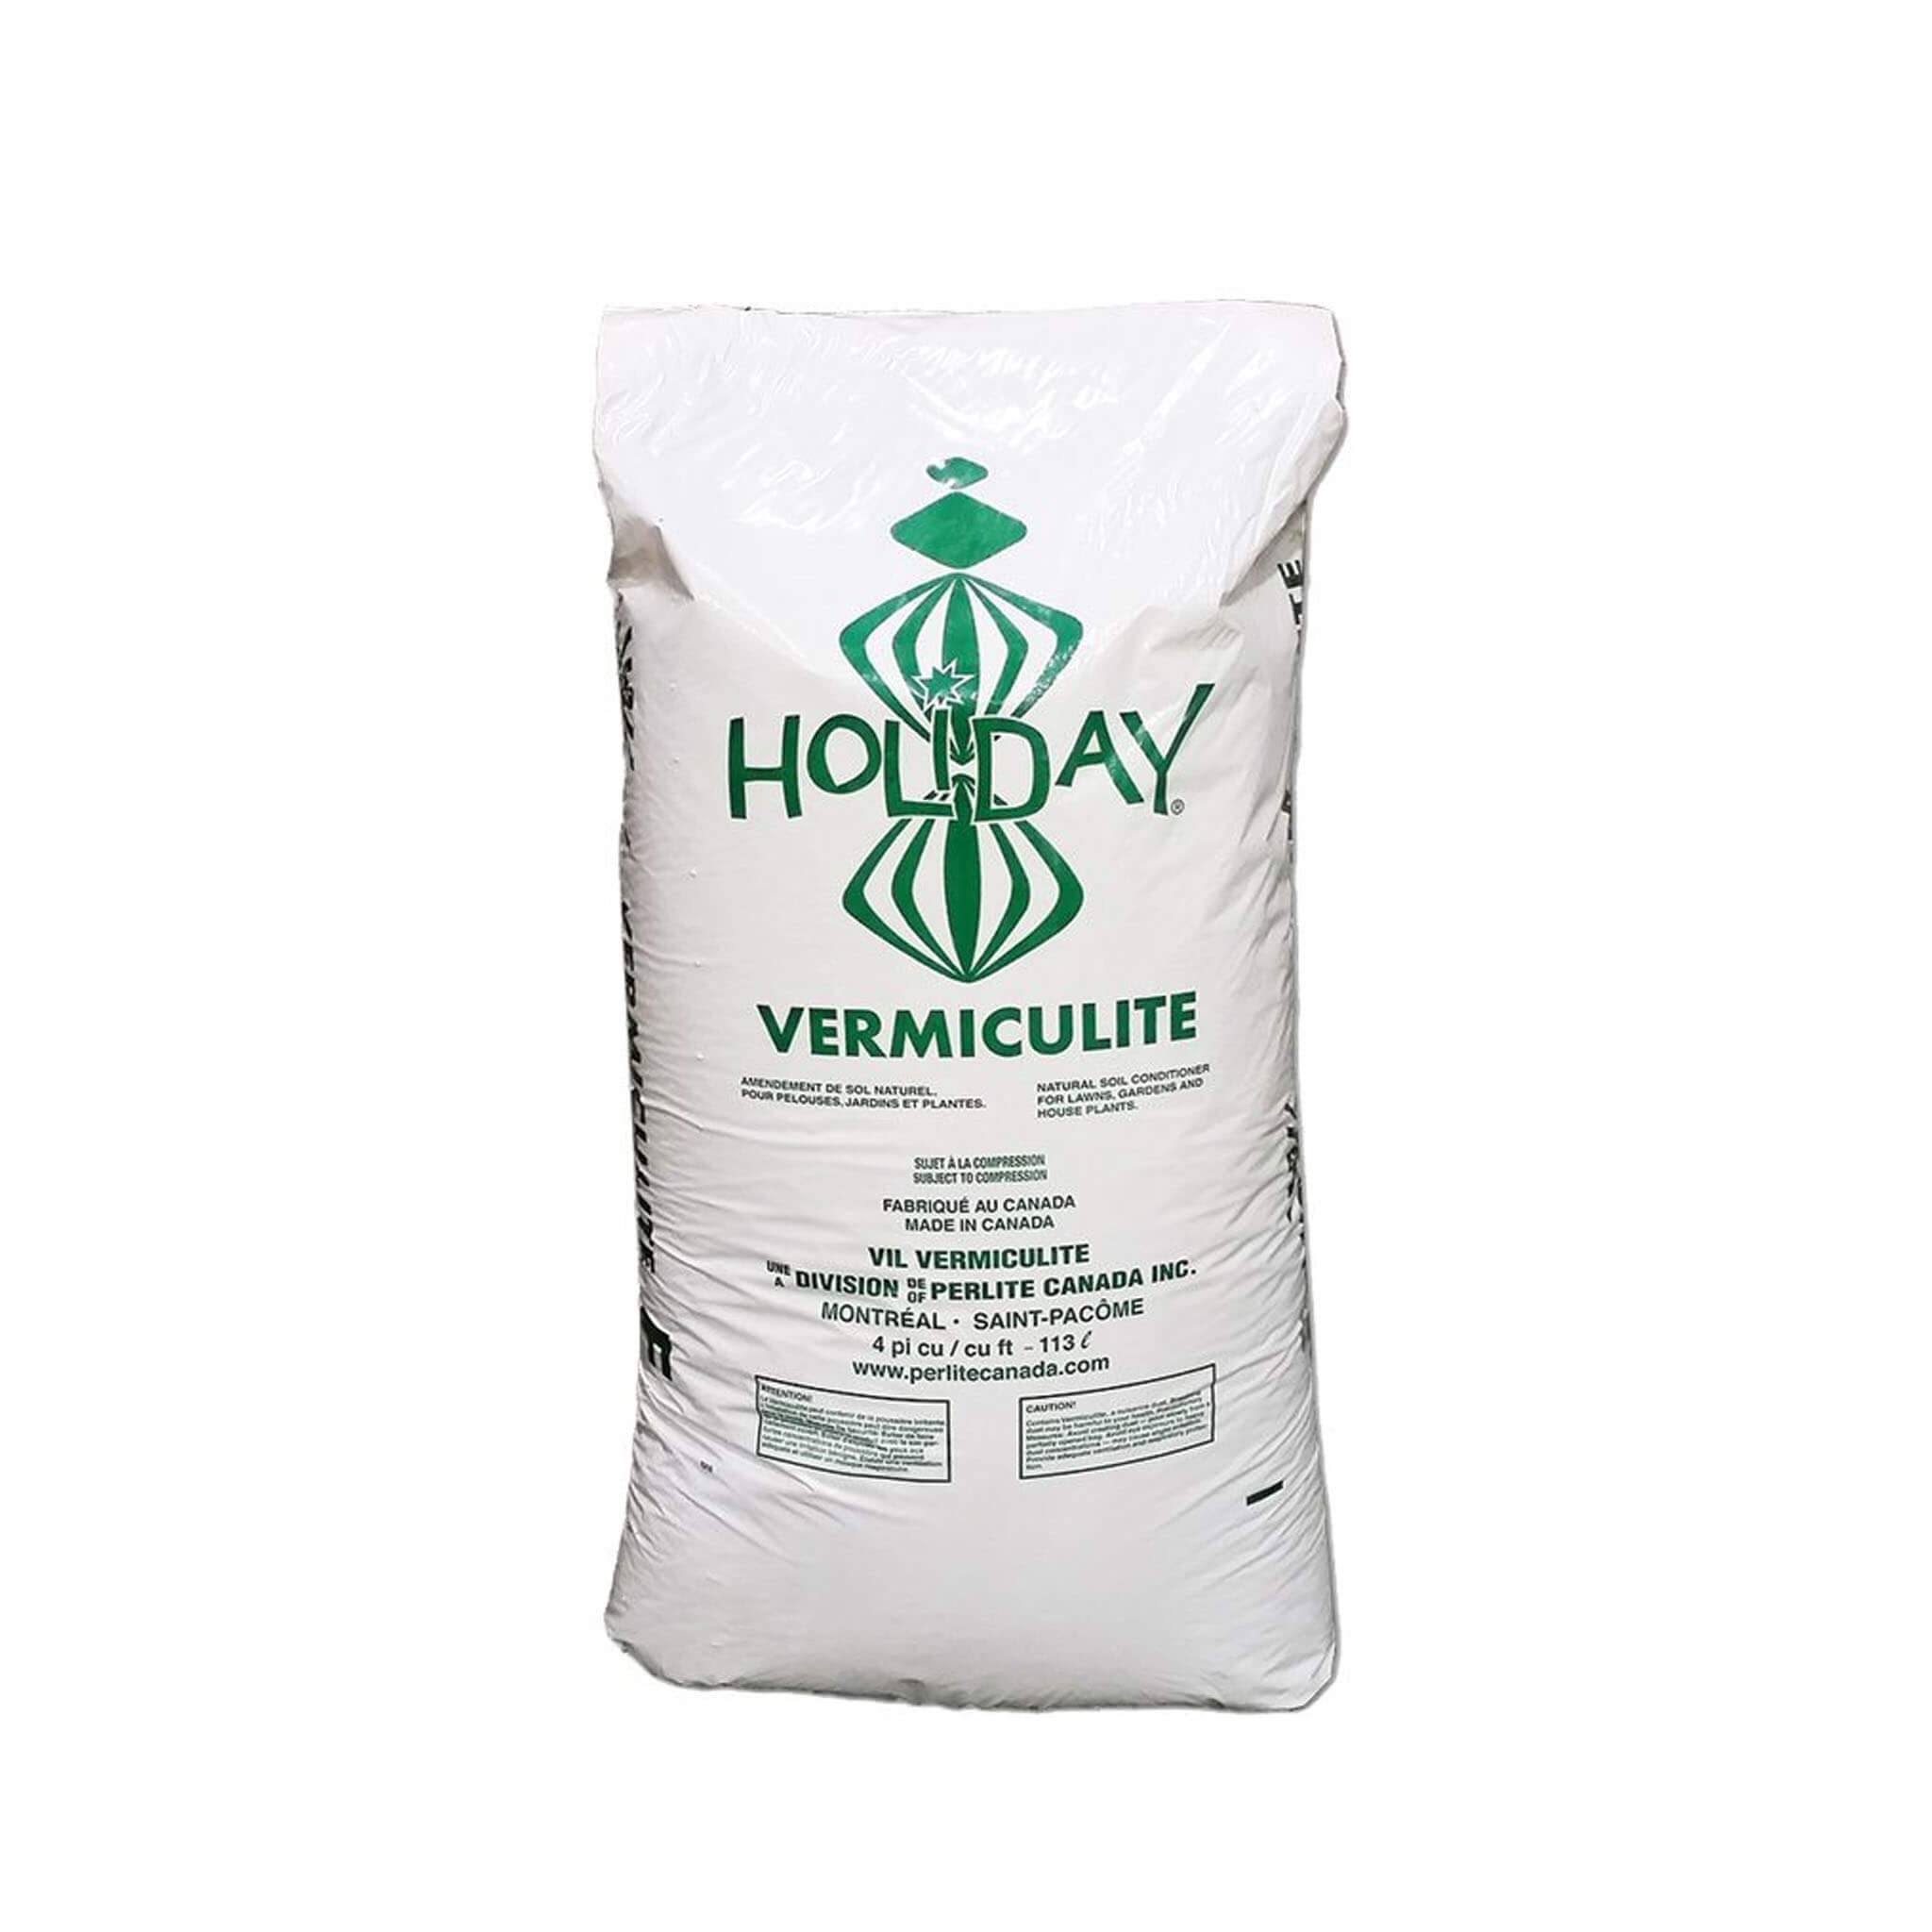 Holiday Vermiculite 112L